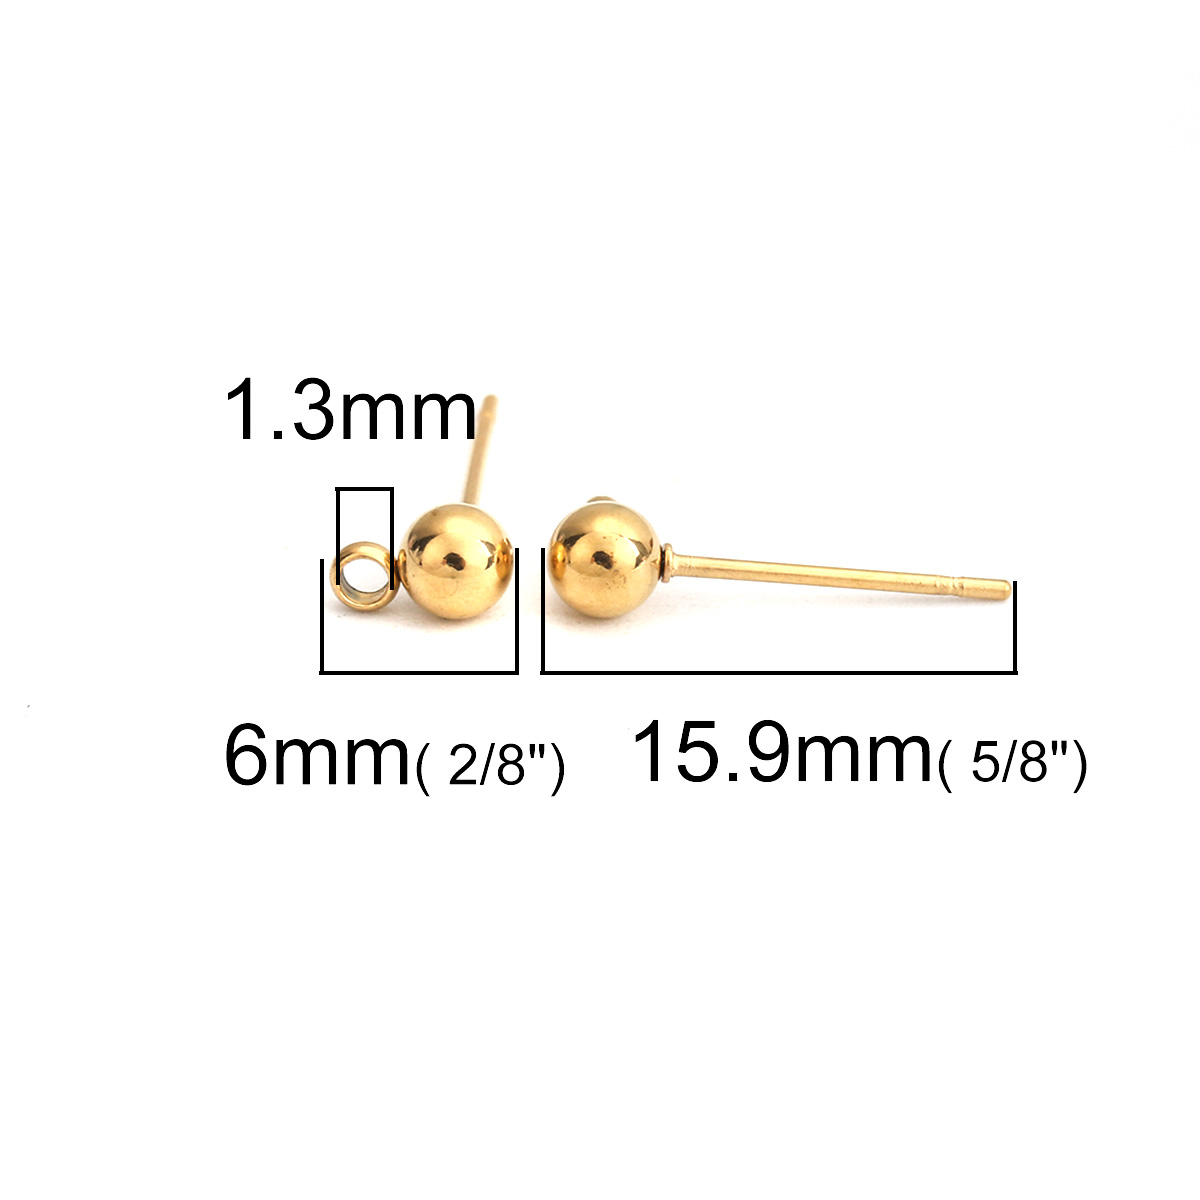 Picture of Stainless Steel Ear Post Stud Earrings Round Gold Plated W/ Loop 6mm x 4mm, Post/ Wire Size: (21 gauge), 10 PCs